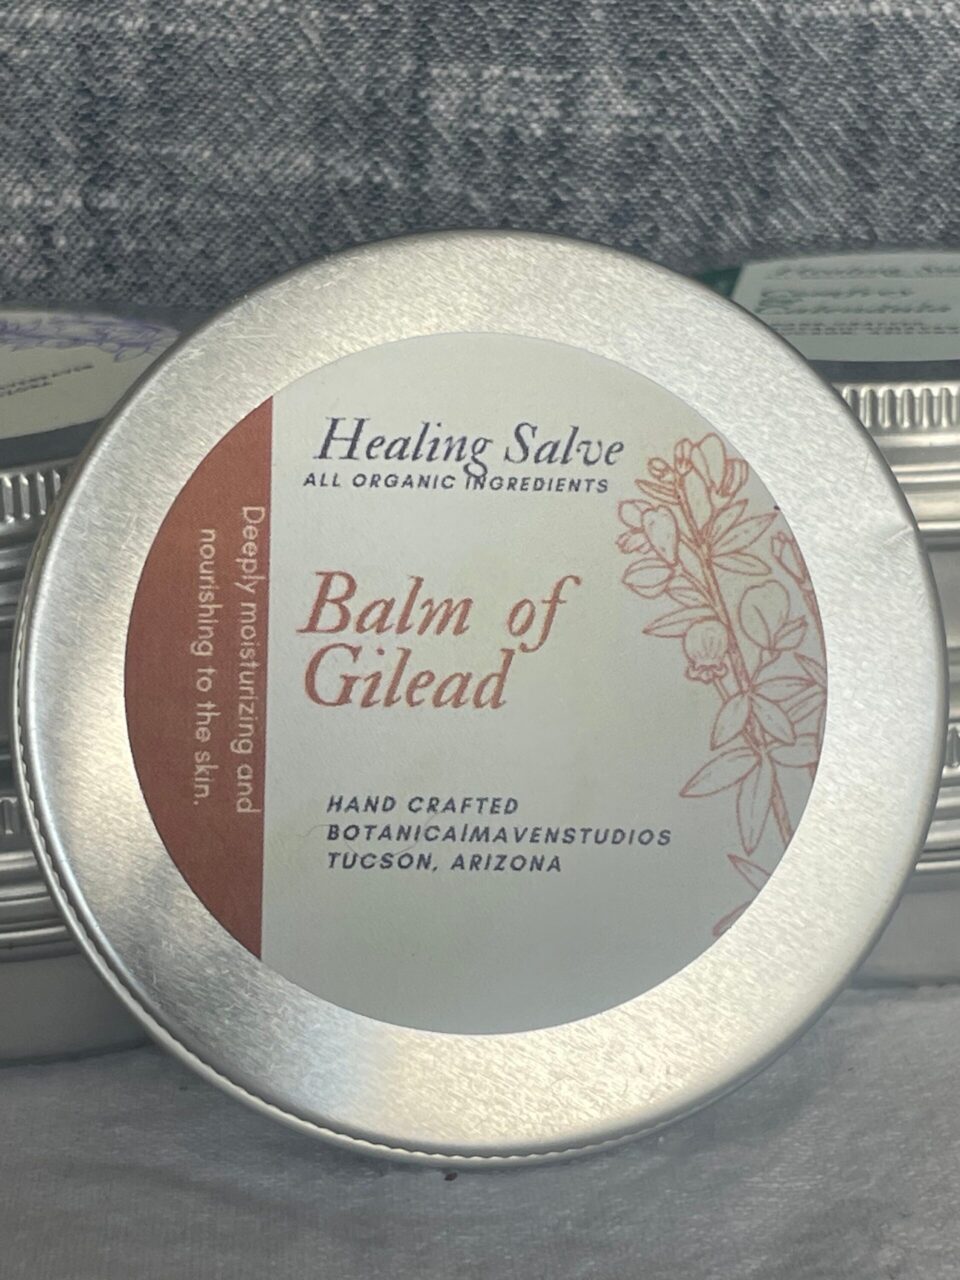 Balm of Gilead Salve Label scaled